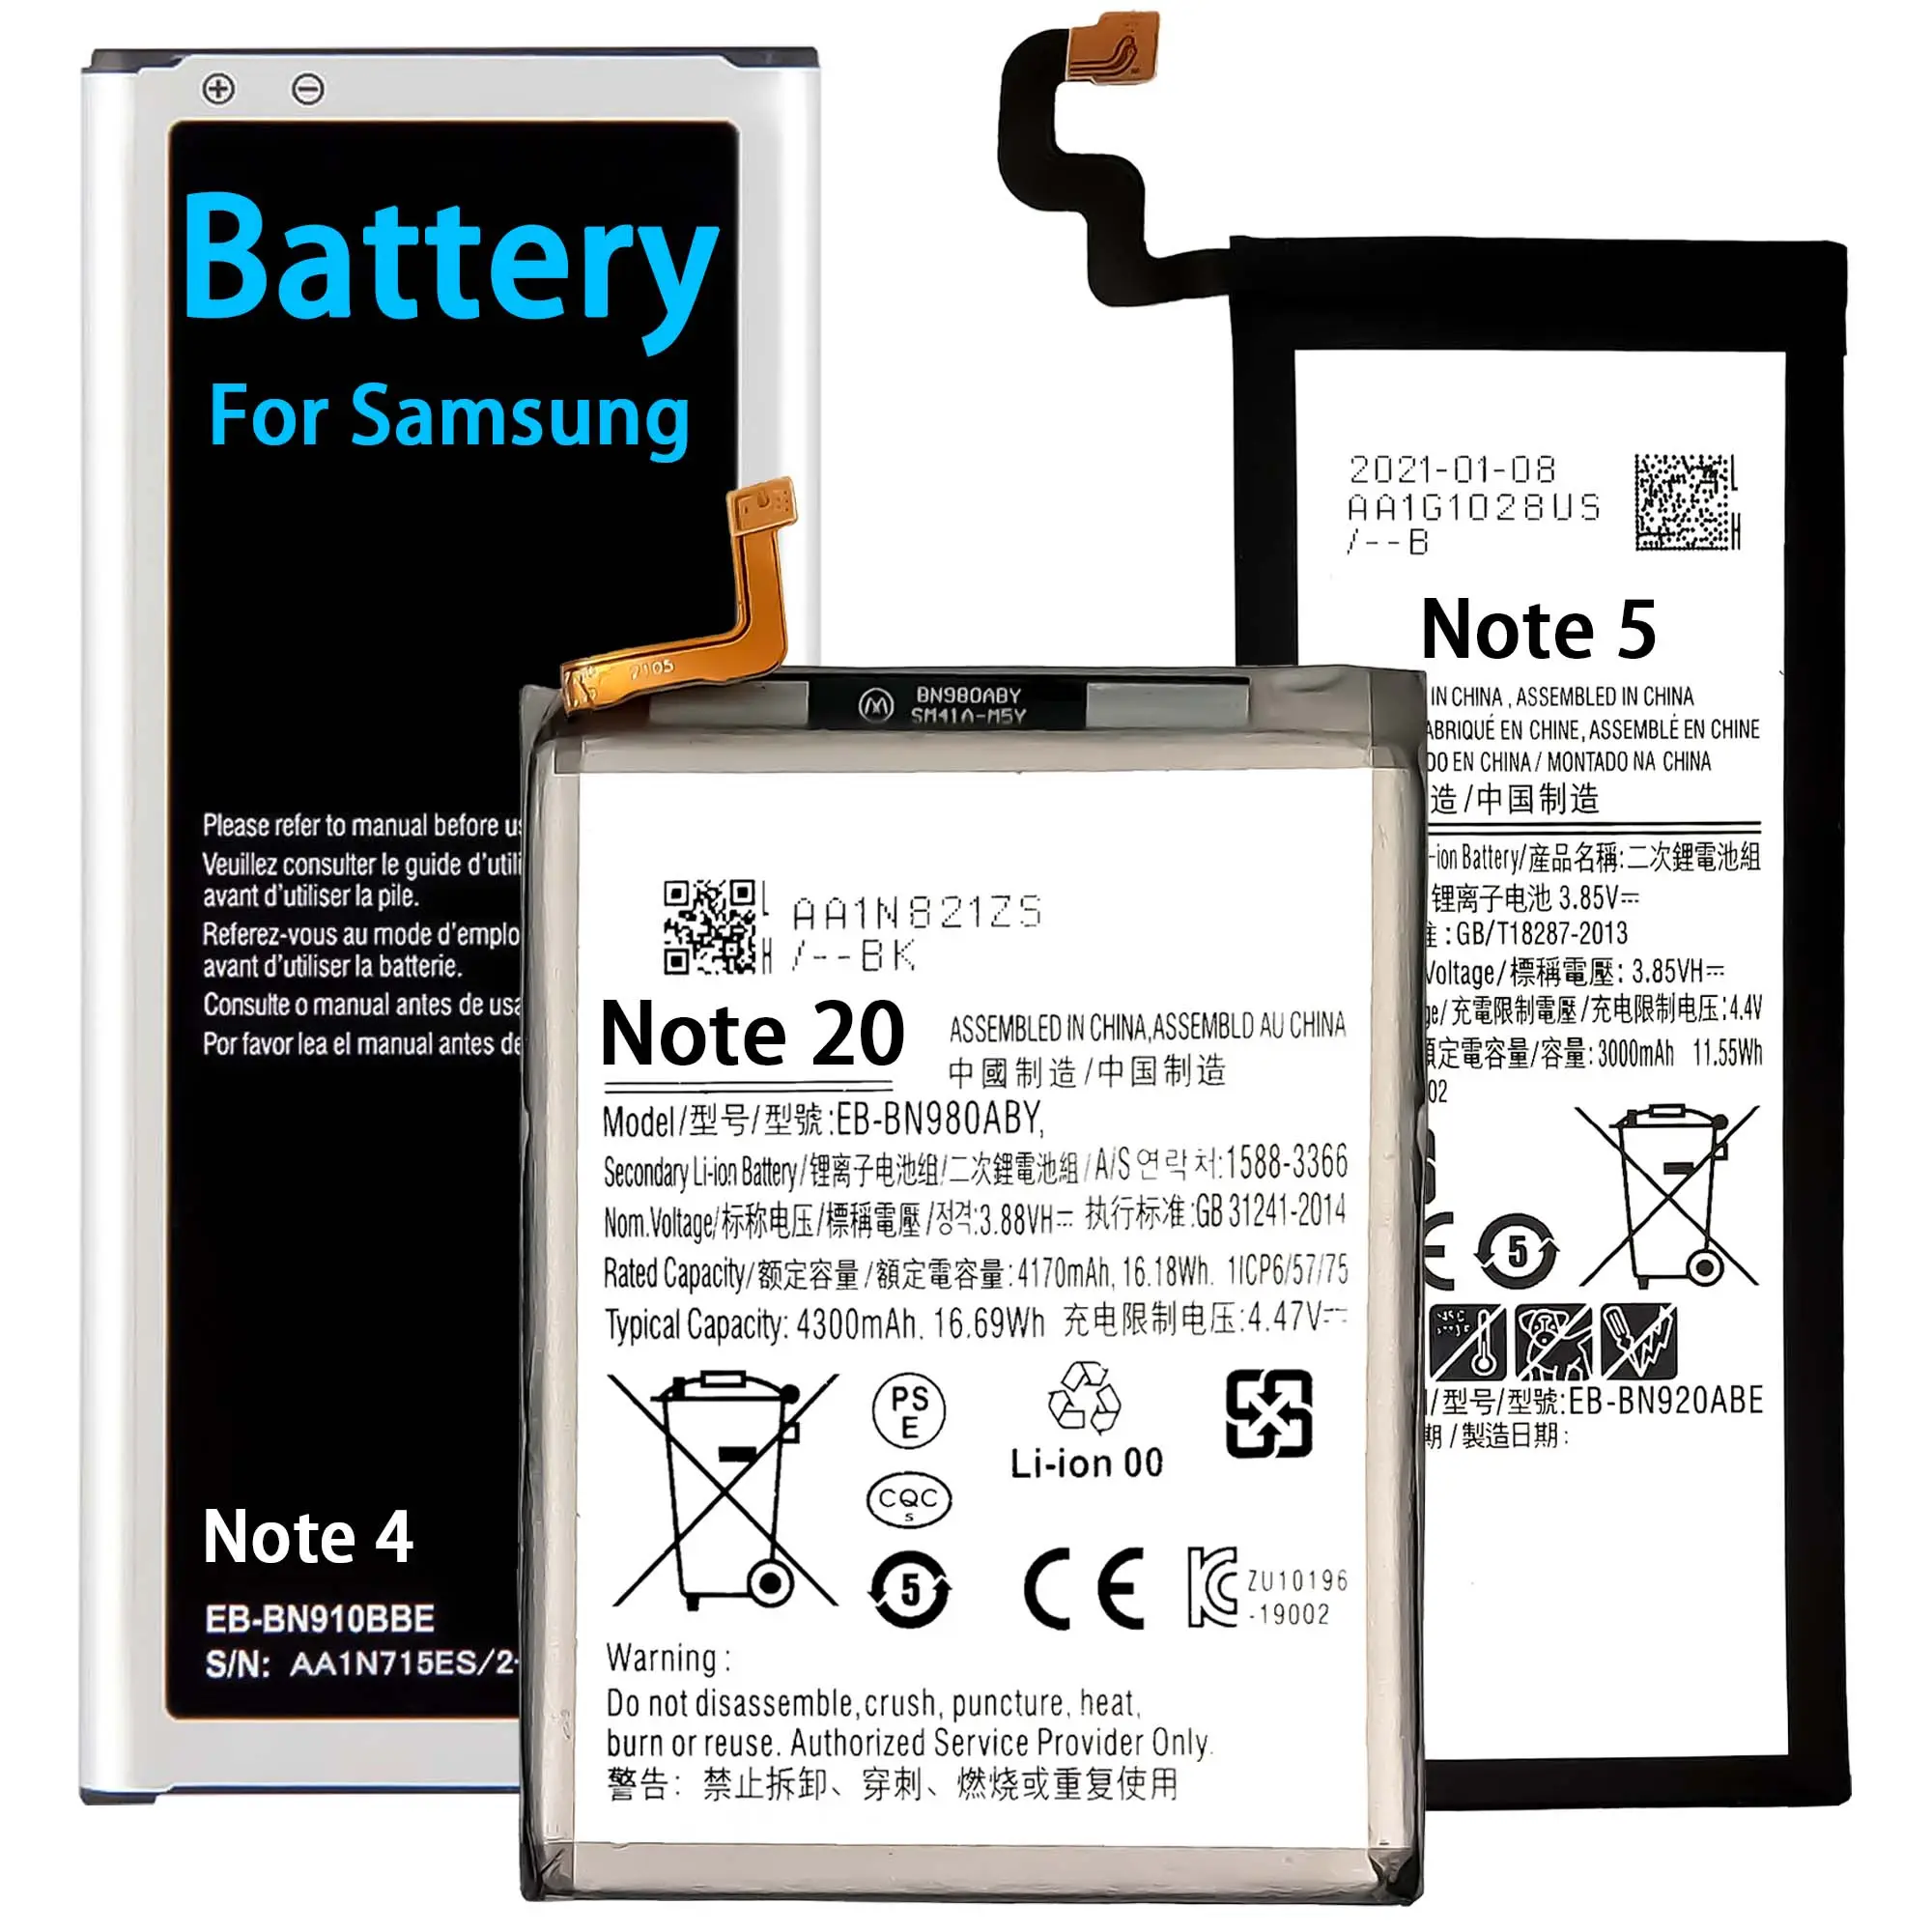 NOTE NOTE2 NOTE3 NOTE4 NOTE5 NOTE7 NOTE8 NOTE9 NOTE10 NOTE20 rechargeable battery for Galaxy Note 10 lite